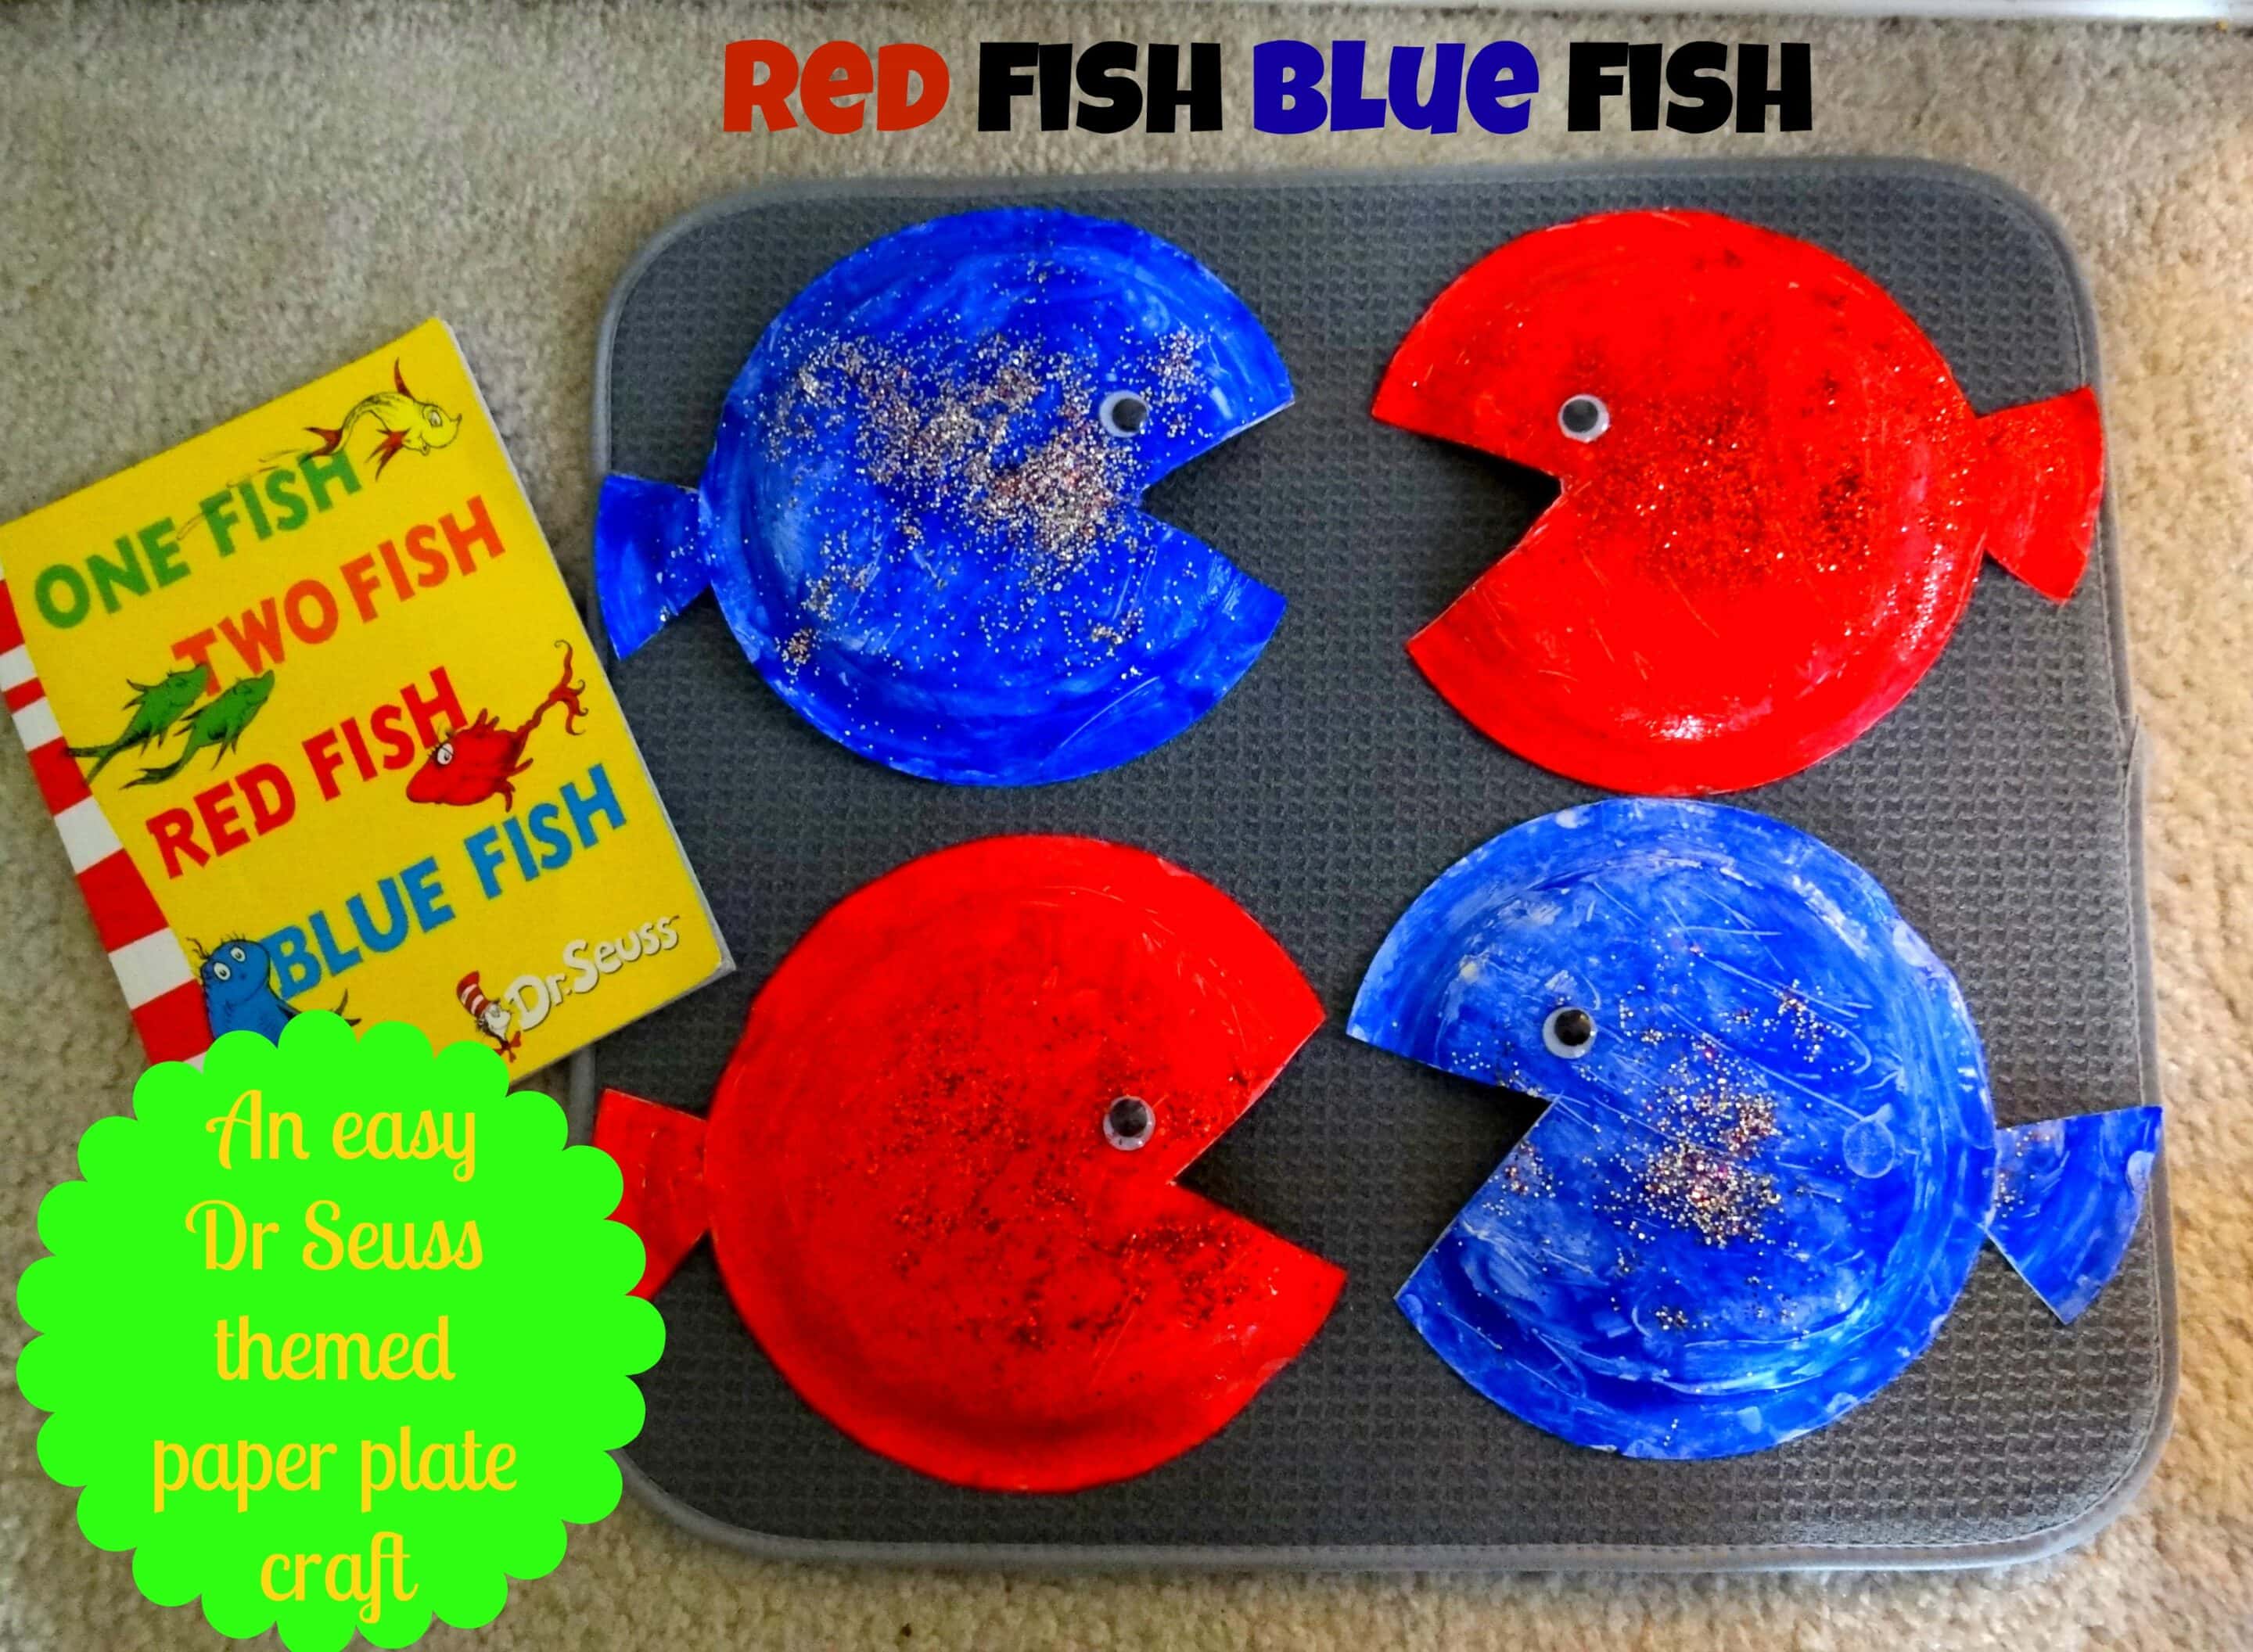 Red Fish Blue Fish Dr Seuss themed paper plate craft for toddlers and preschoolers.